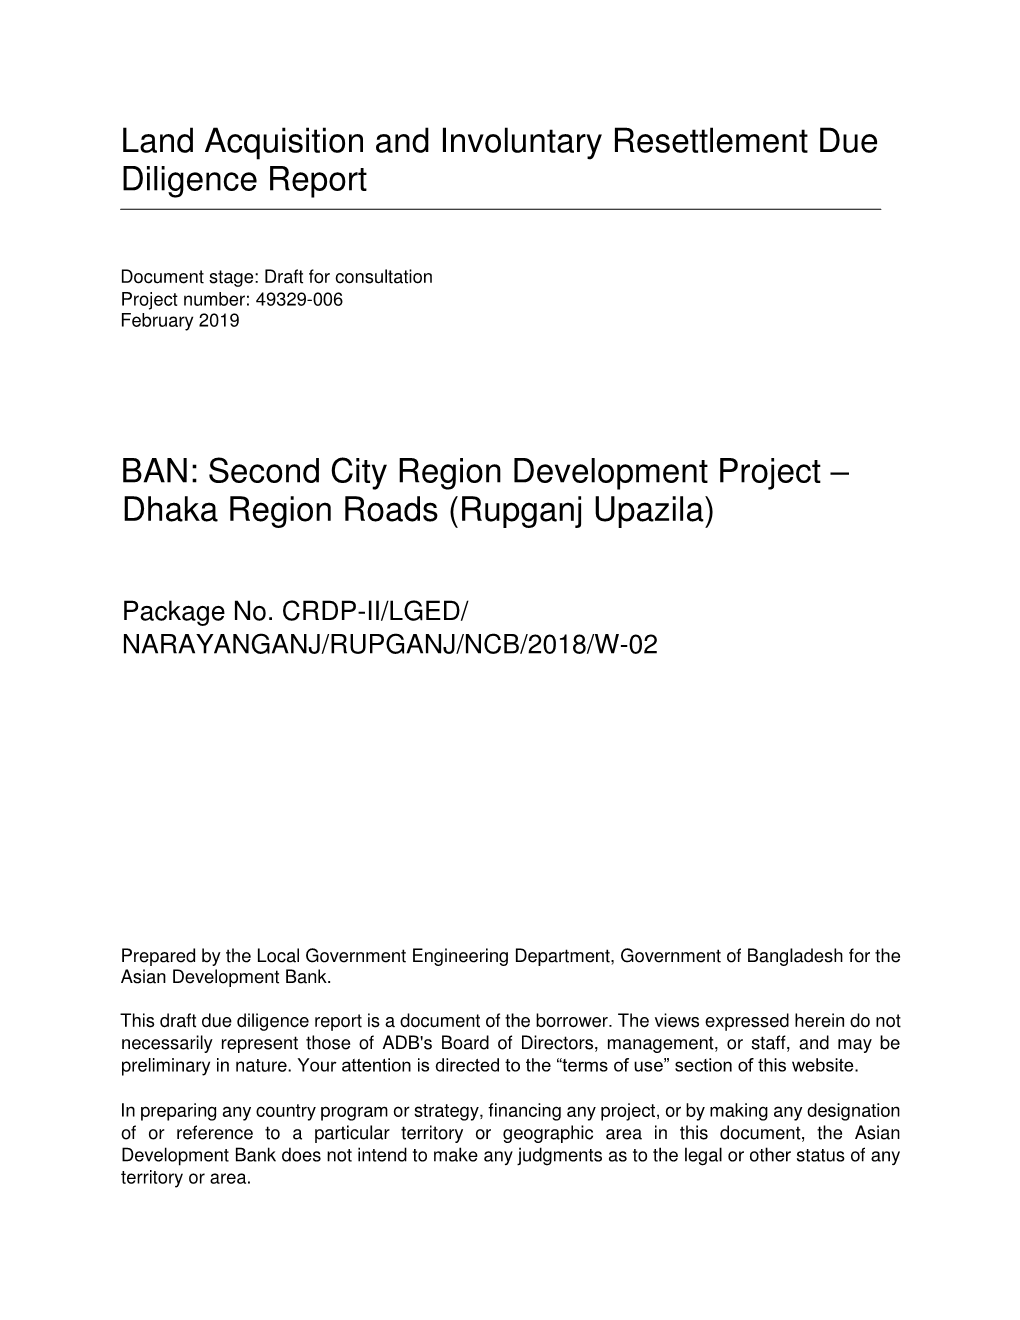 Land Acquisition and Involuntary Resettlement Due Diligence Report